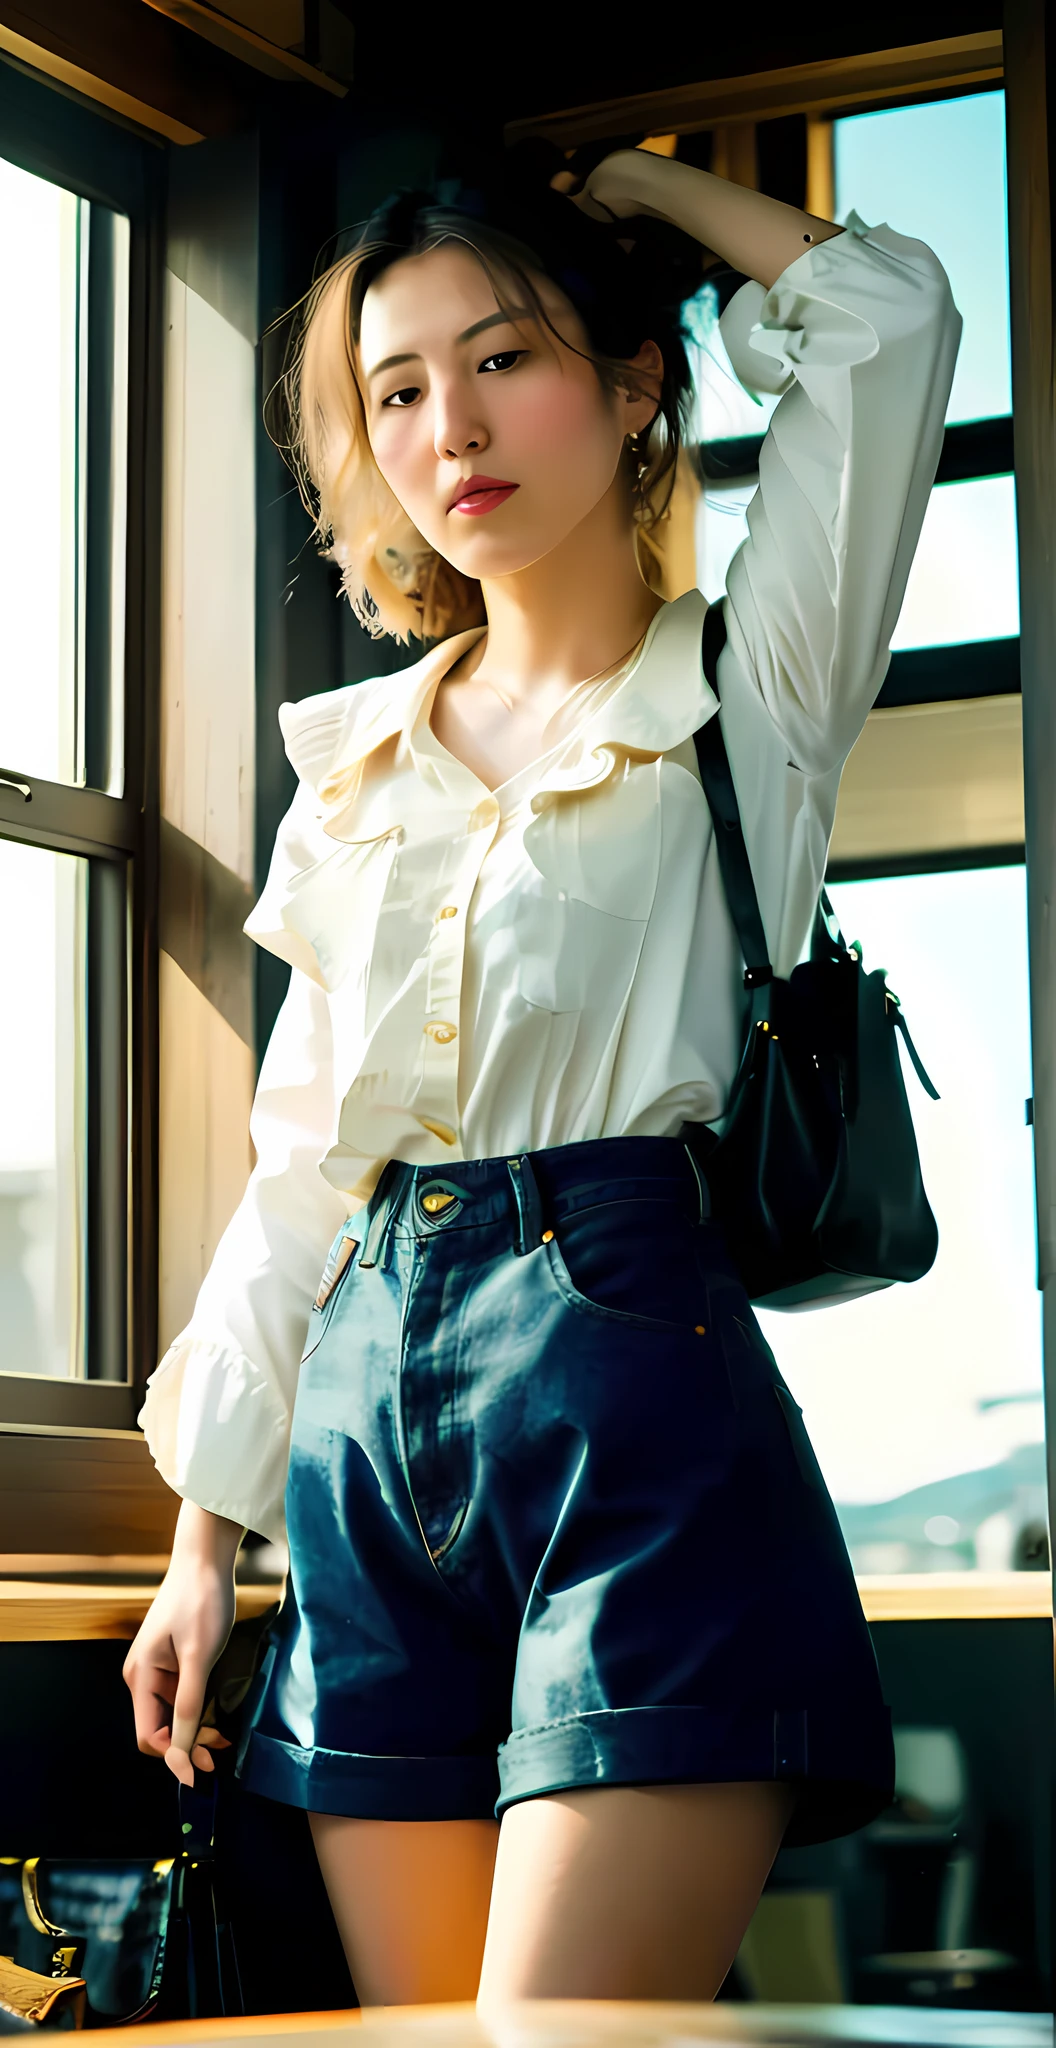 there is a woman standing in front of a window with a purse, ad image, denim short pants, loose - fitting blouses, beautiful image, absolutely outstanding image, casual clothing style, by Eizan Kikukawa, tsubasa nakai's style, cream colored blouse, frill, by Naondo Nakamura, by Maeda Masao, wearing a blouse